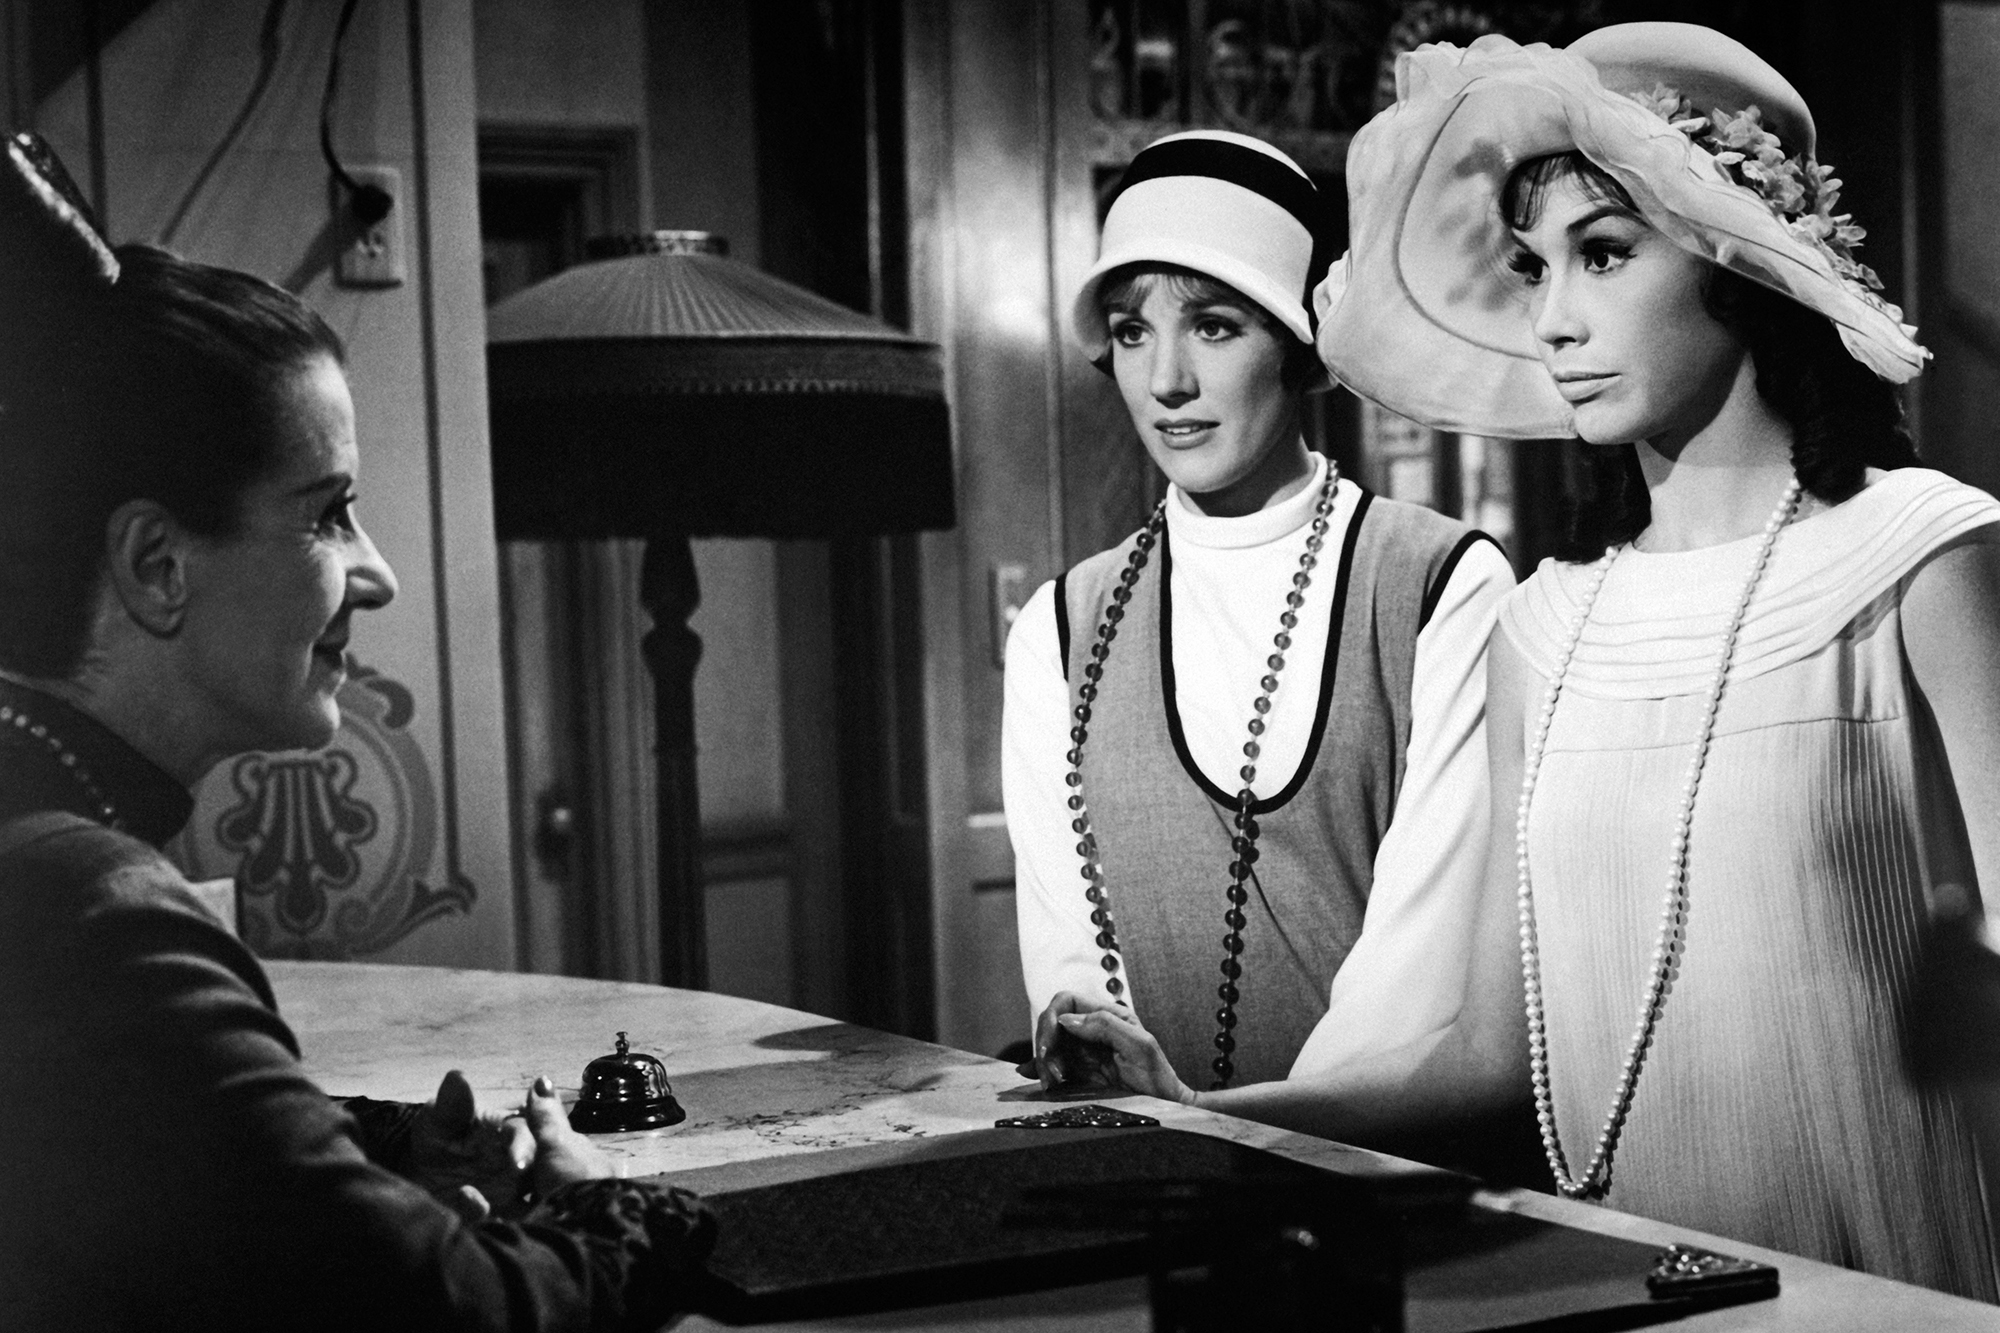 Julie Andrews and Mary Tyler Moore in Thoroughly Modern Millie, 1967.